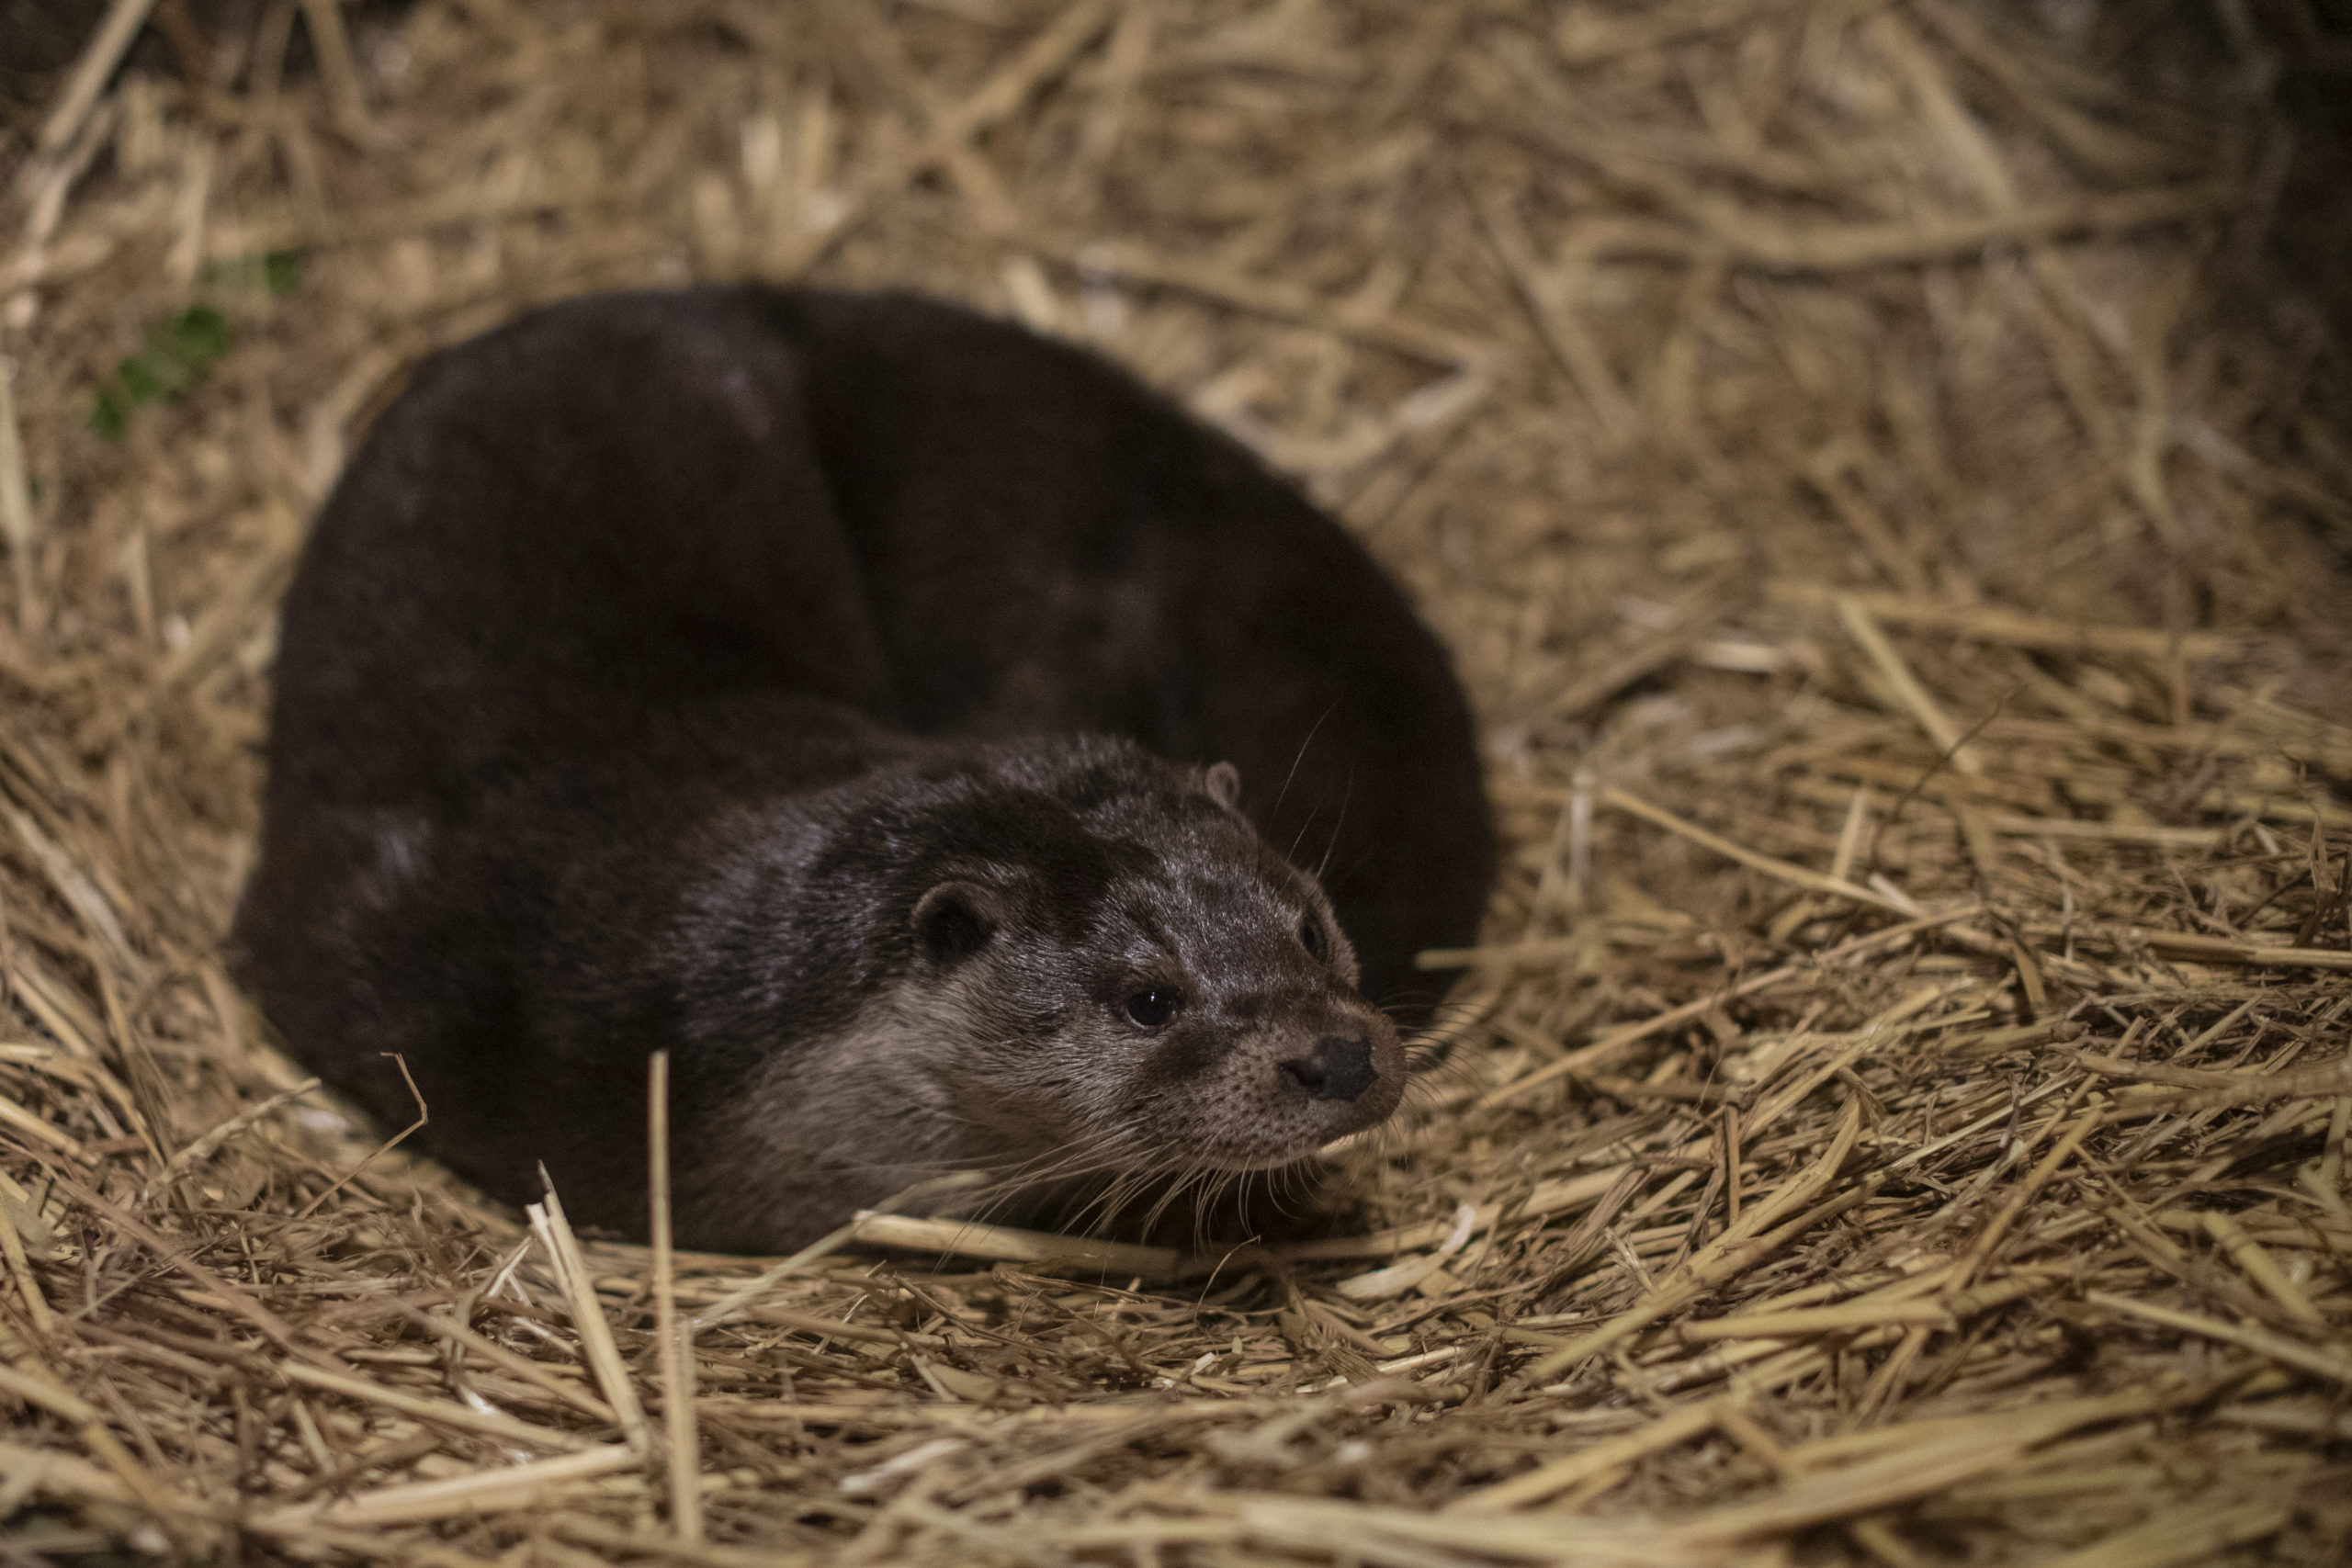 A Eurasian otter at Wildwood. Thetters' habitat shrunk in the second half of the century due to pesticide use, but have made a comeback in recent years and can now be found across the United Kingdom. (Photo: Dan Kitwood, Getty Images)